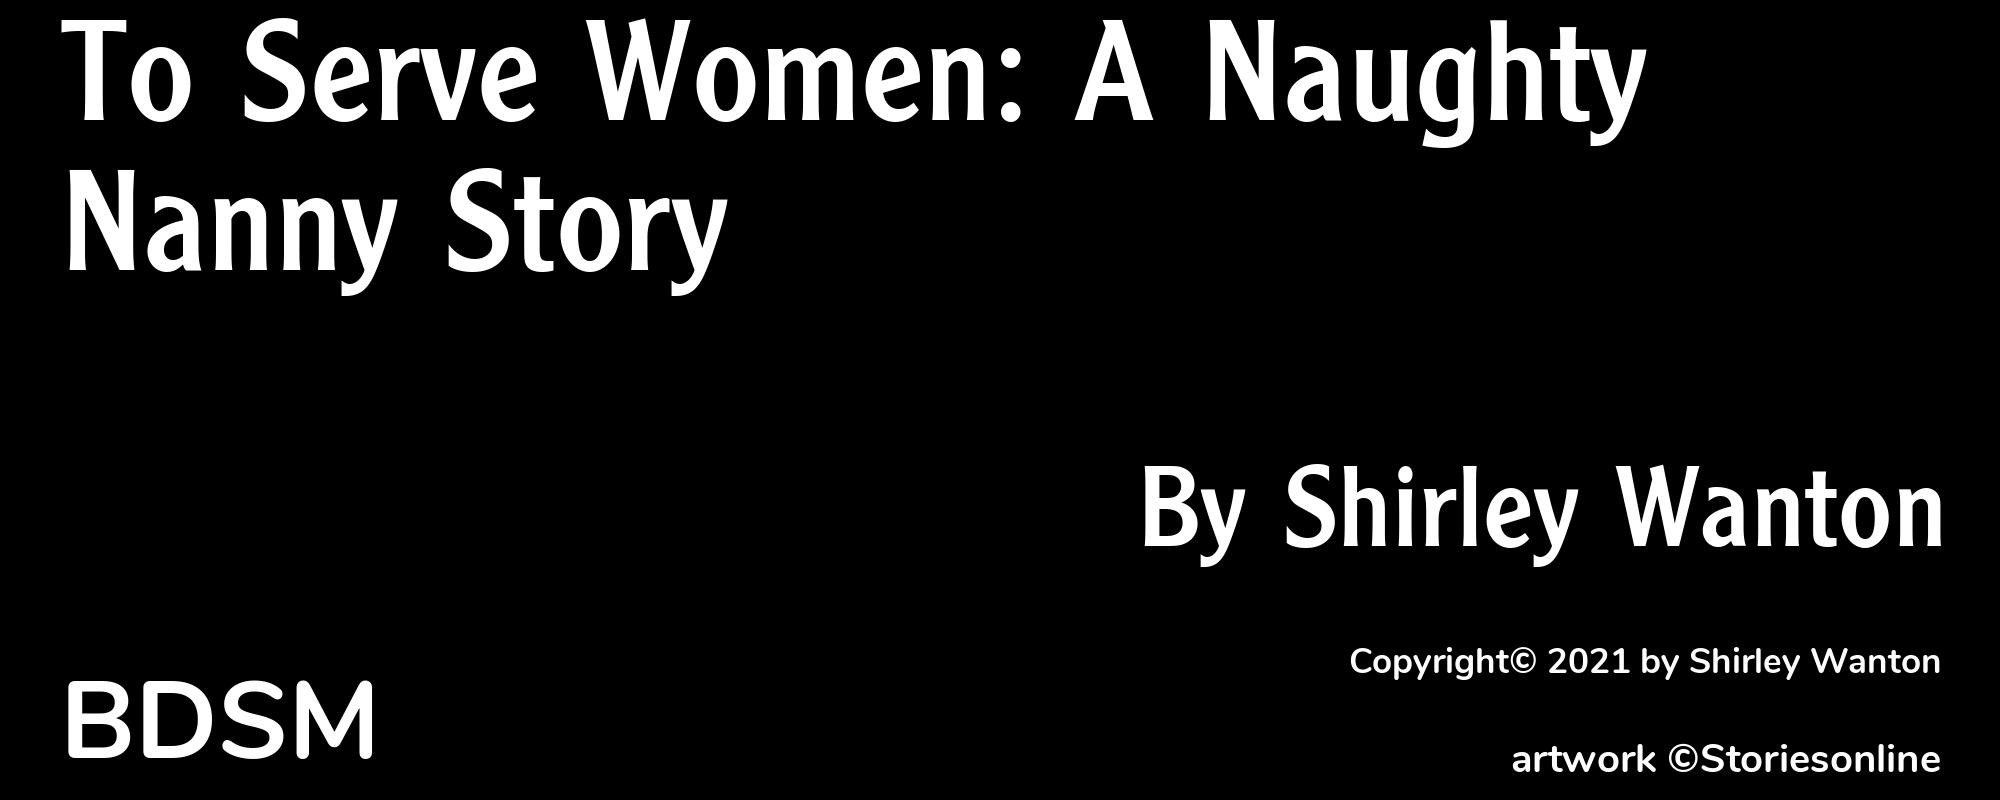 To Serve Women: A Naughty Nanny Story - Cover